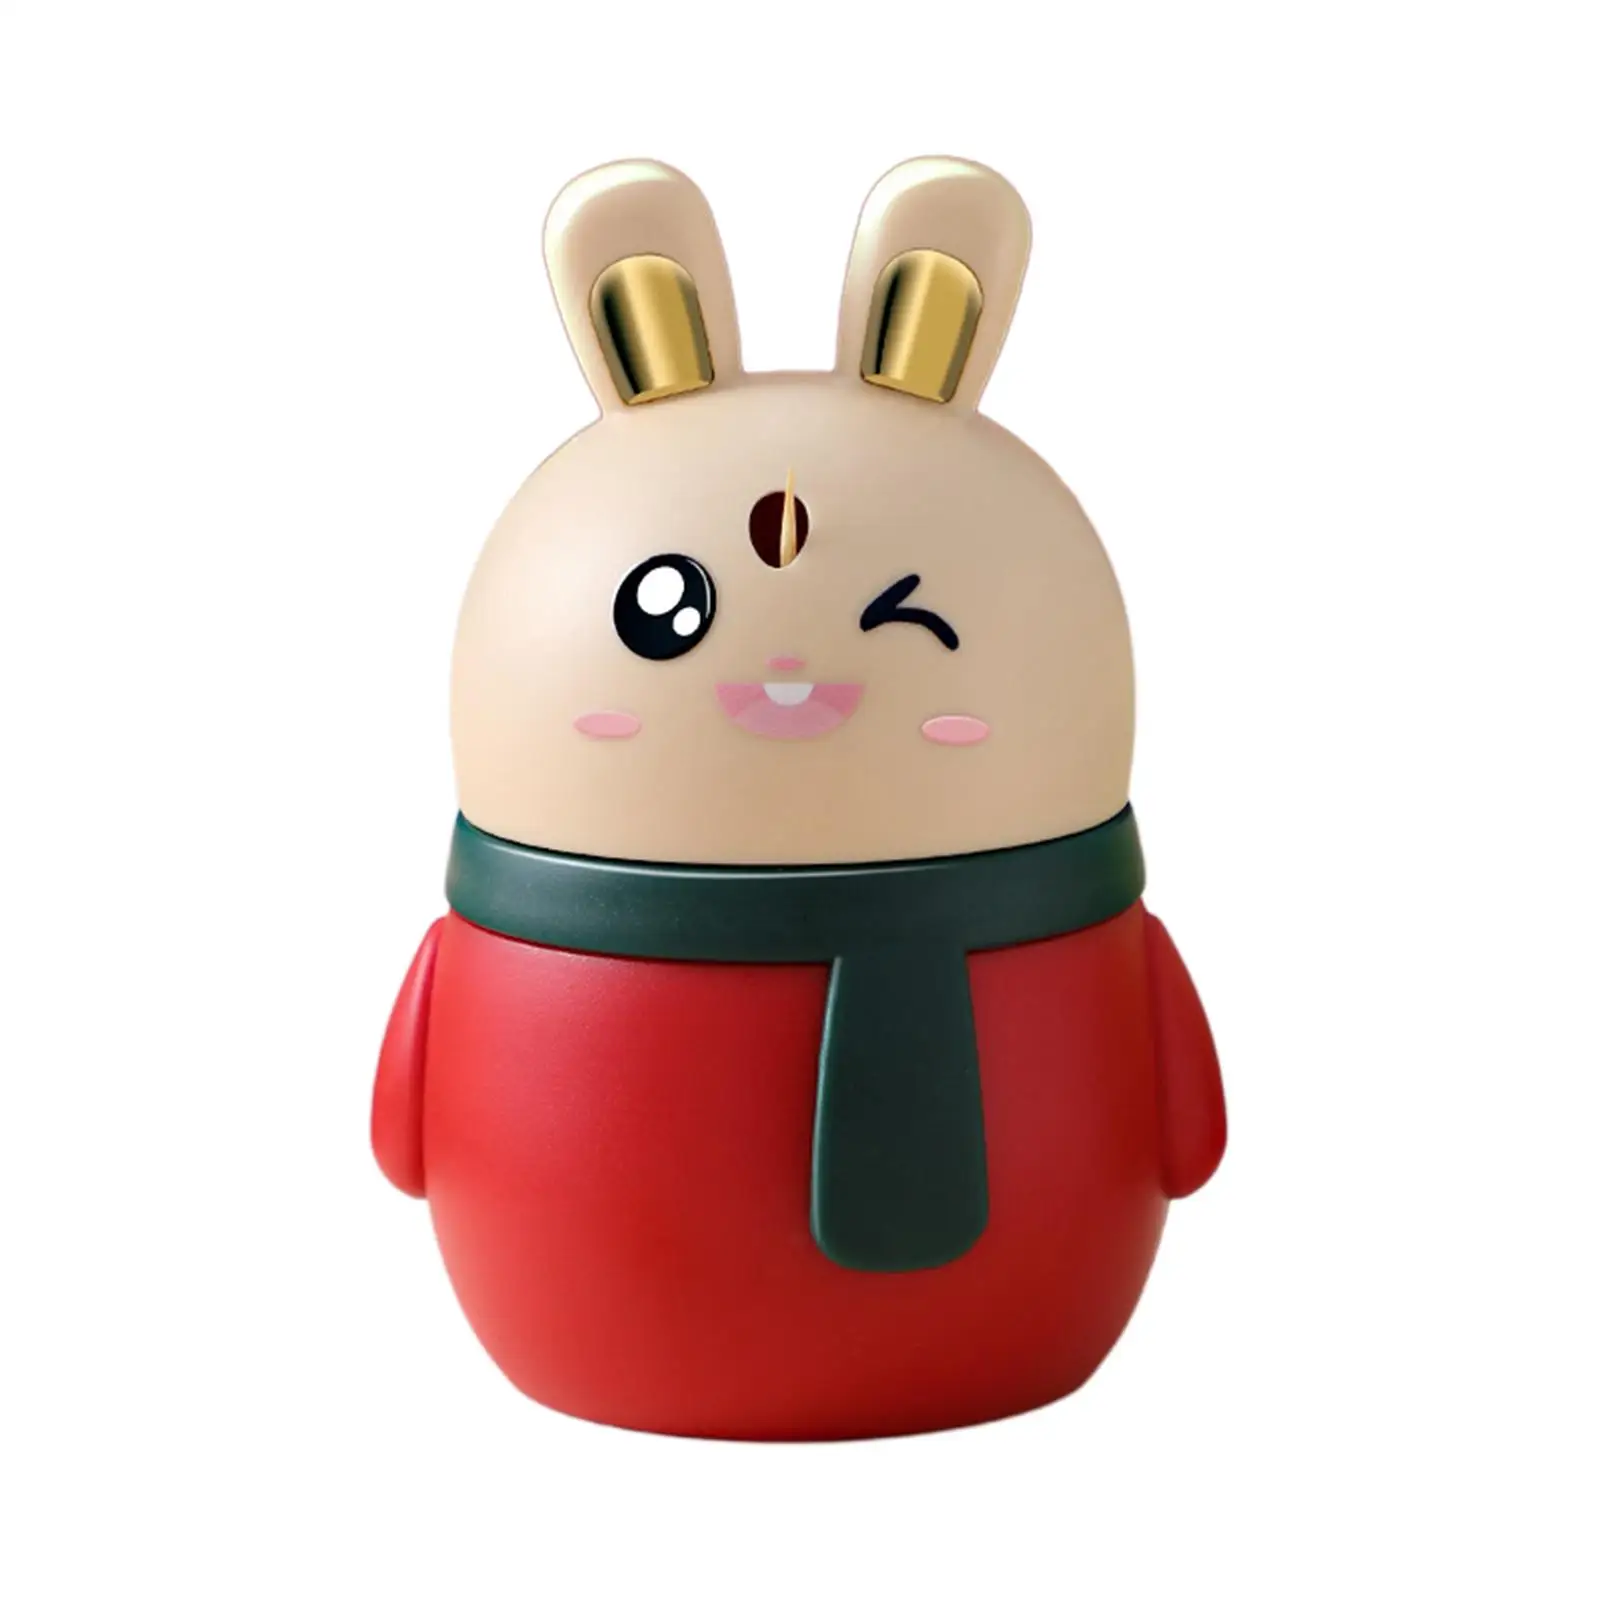 rabbit Toothpick Container Holder Pressing , Just Press The Back Side of Rabbit Head Toothpick Storage Box Durable